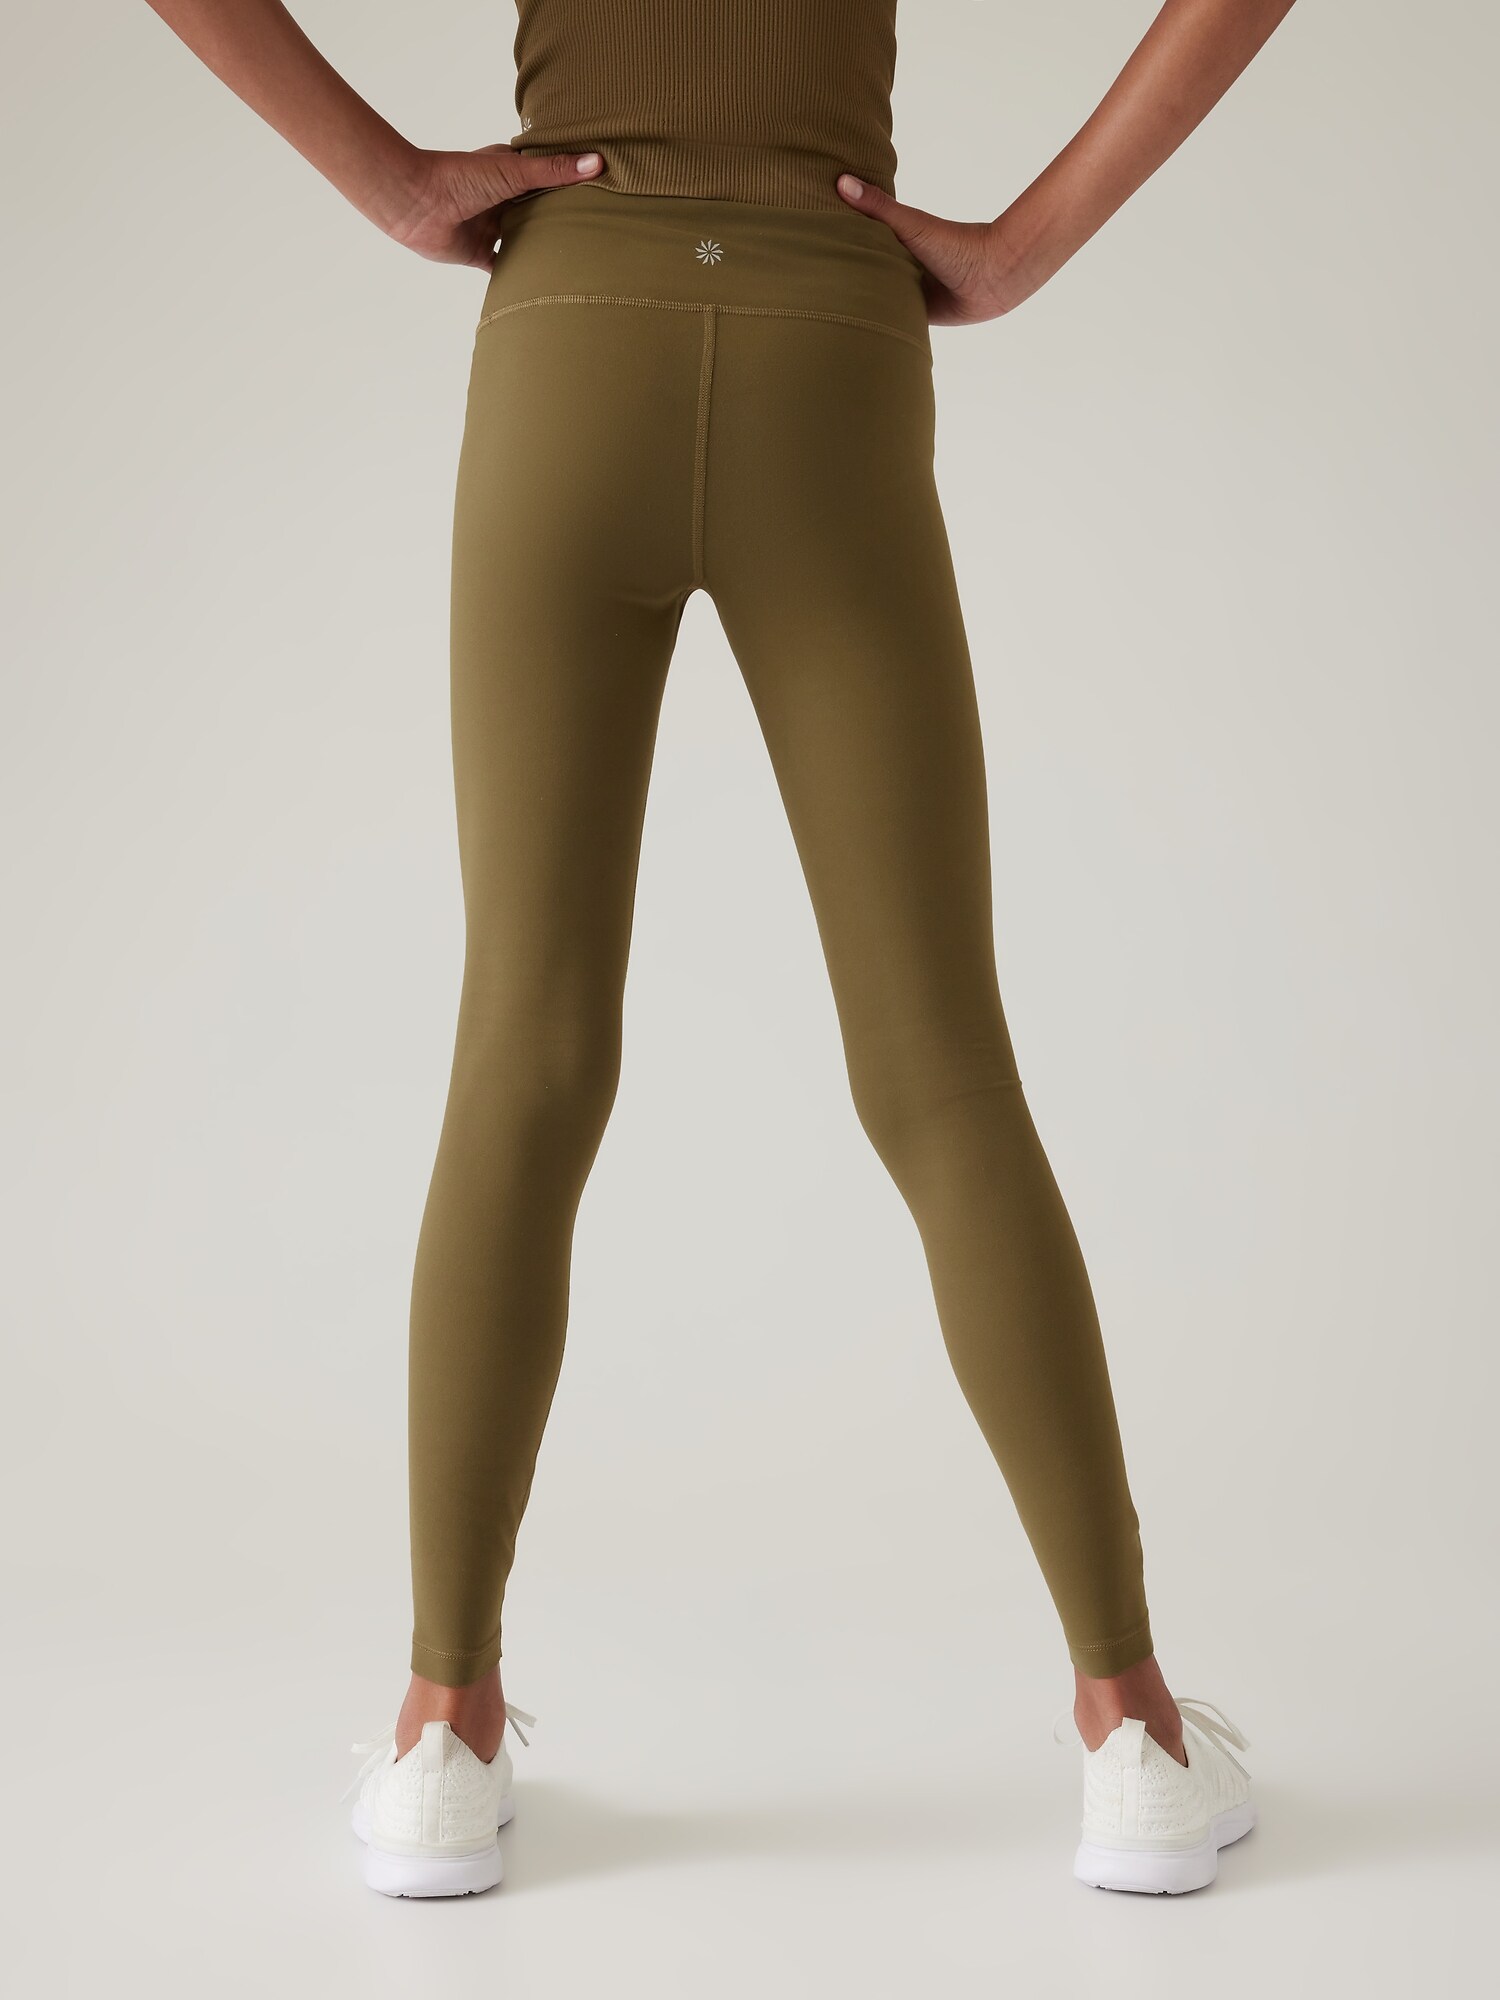 SALE 20% OFF, Sage Green Woodland Leggings, Only size 8-10 left in stock